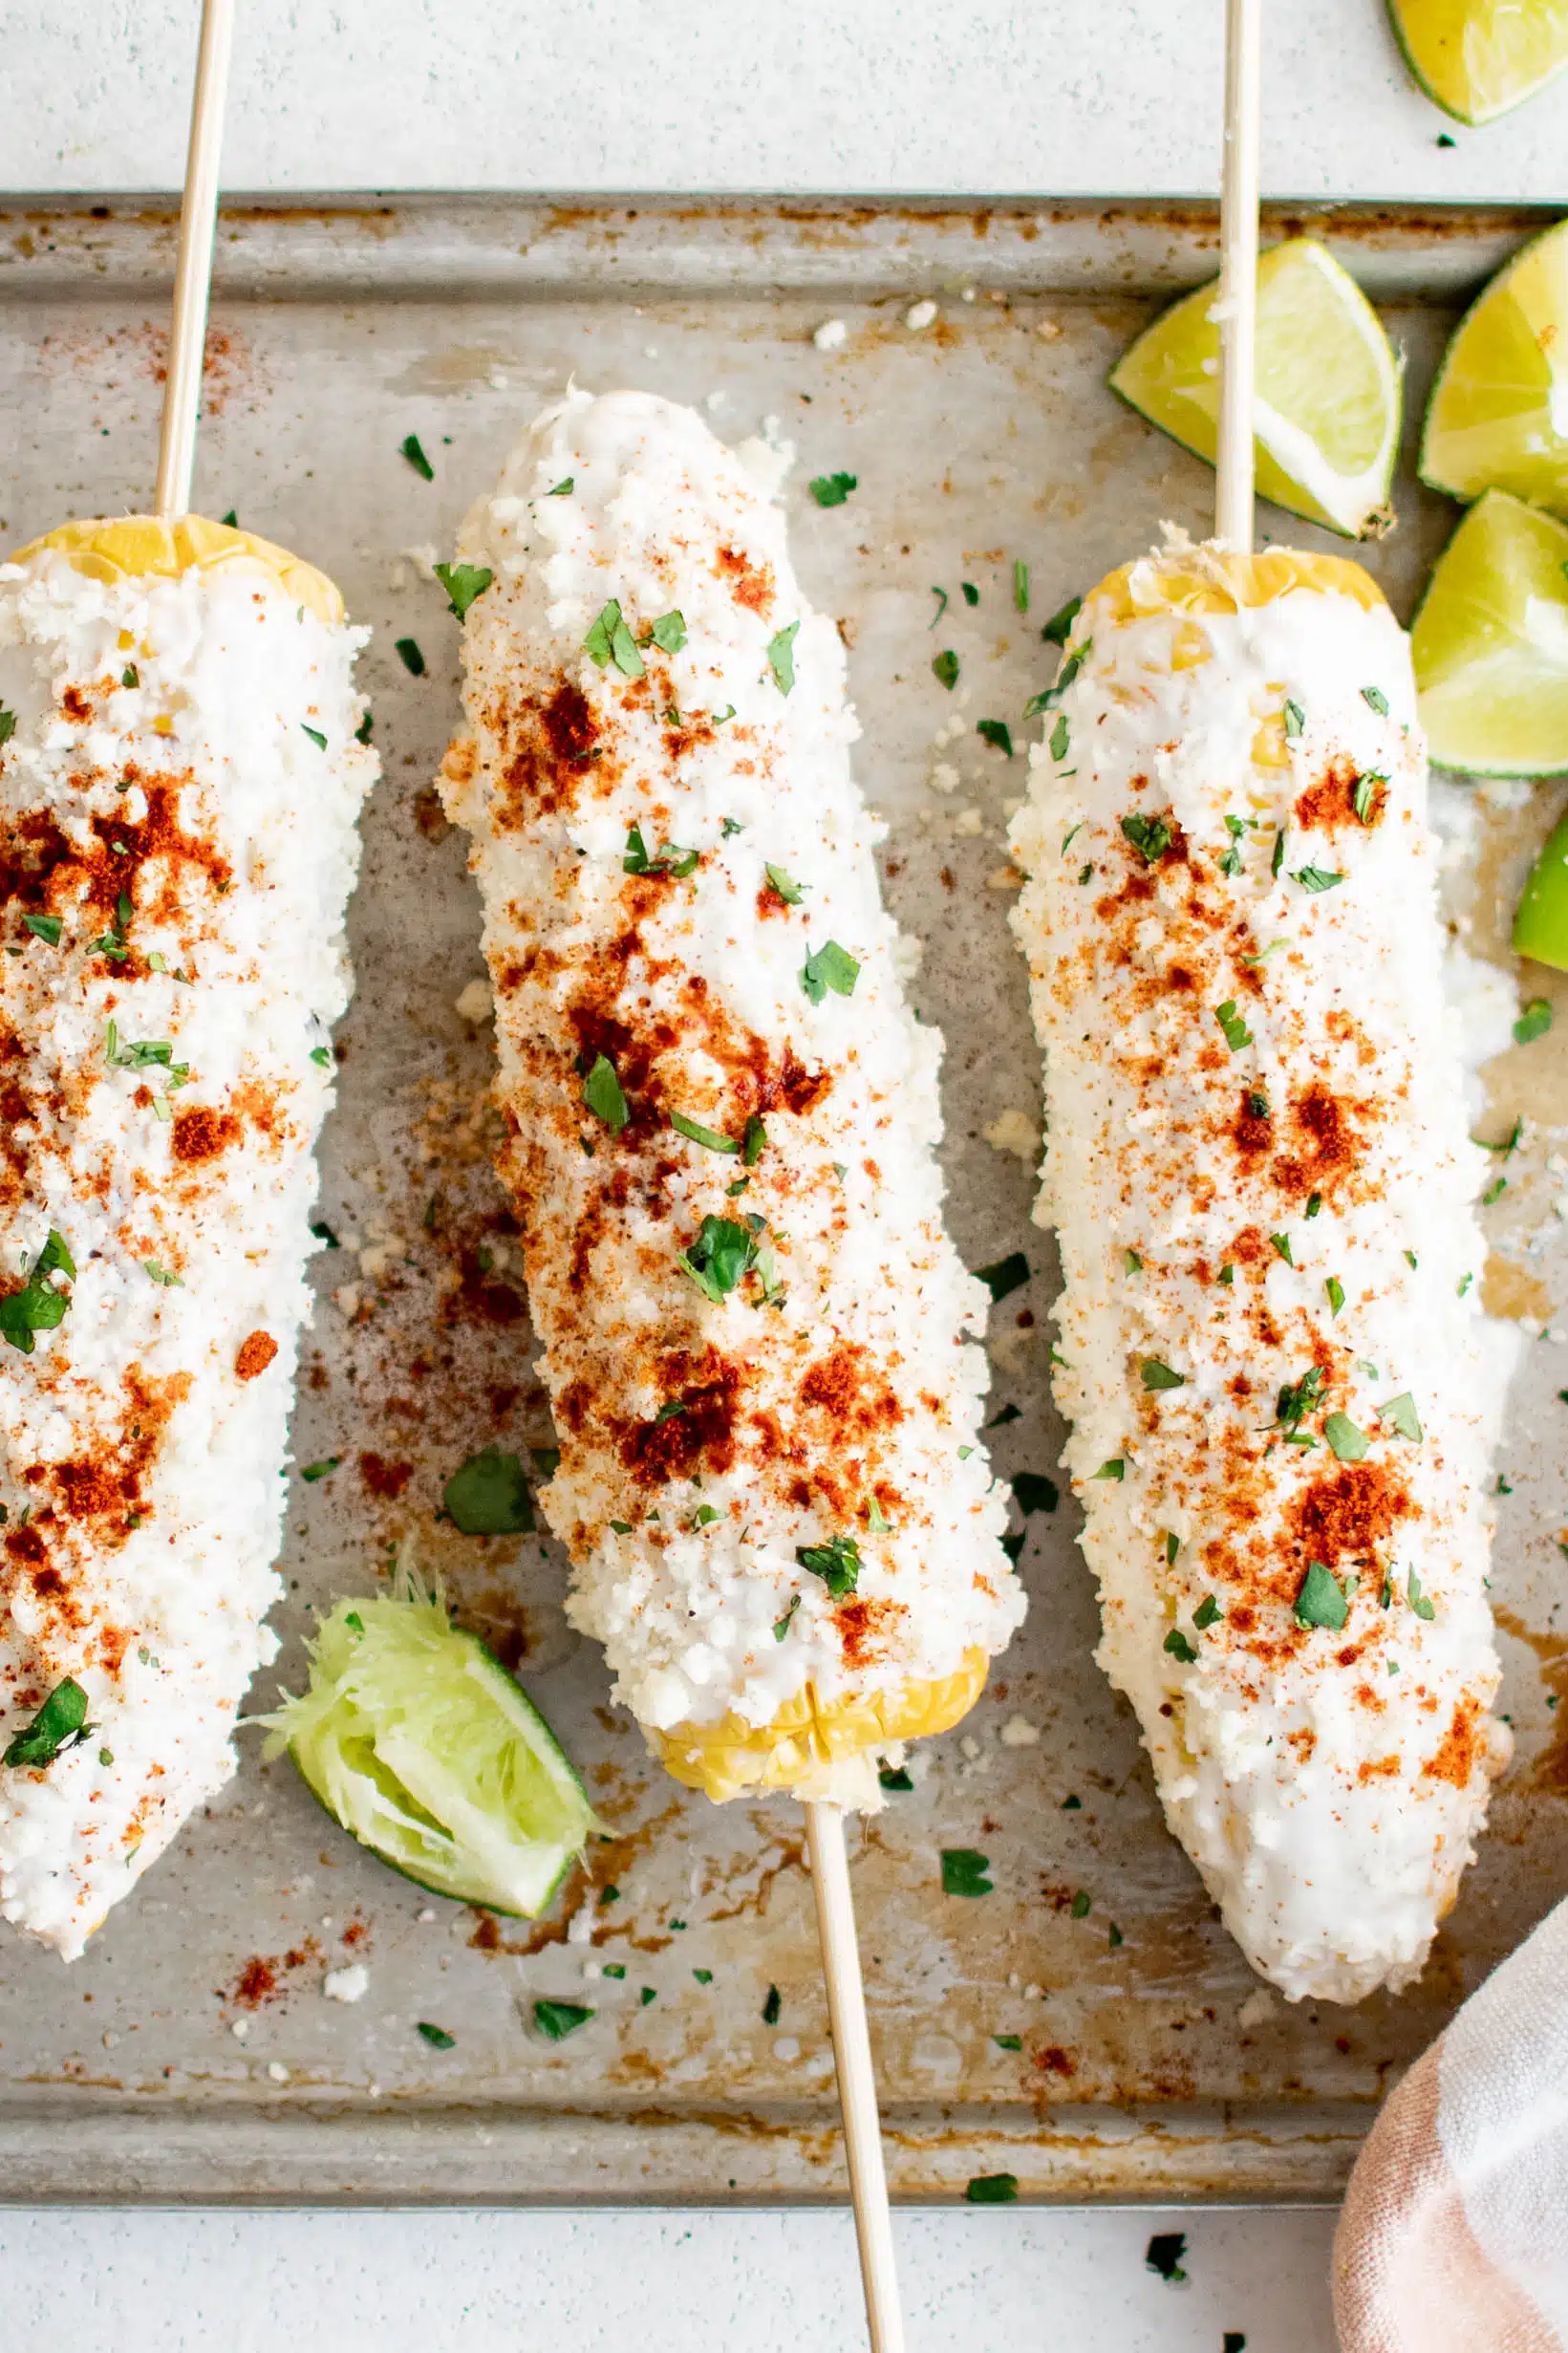 Three prepared elote on a baking sheet and garnished with paprika and chili powder, fresh cilantro, and lime wedges.